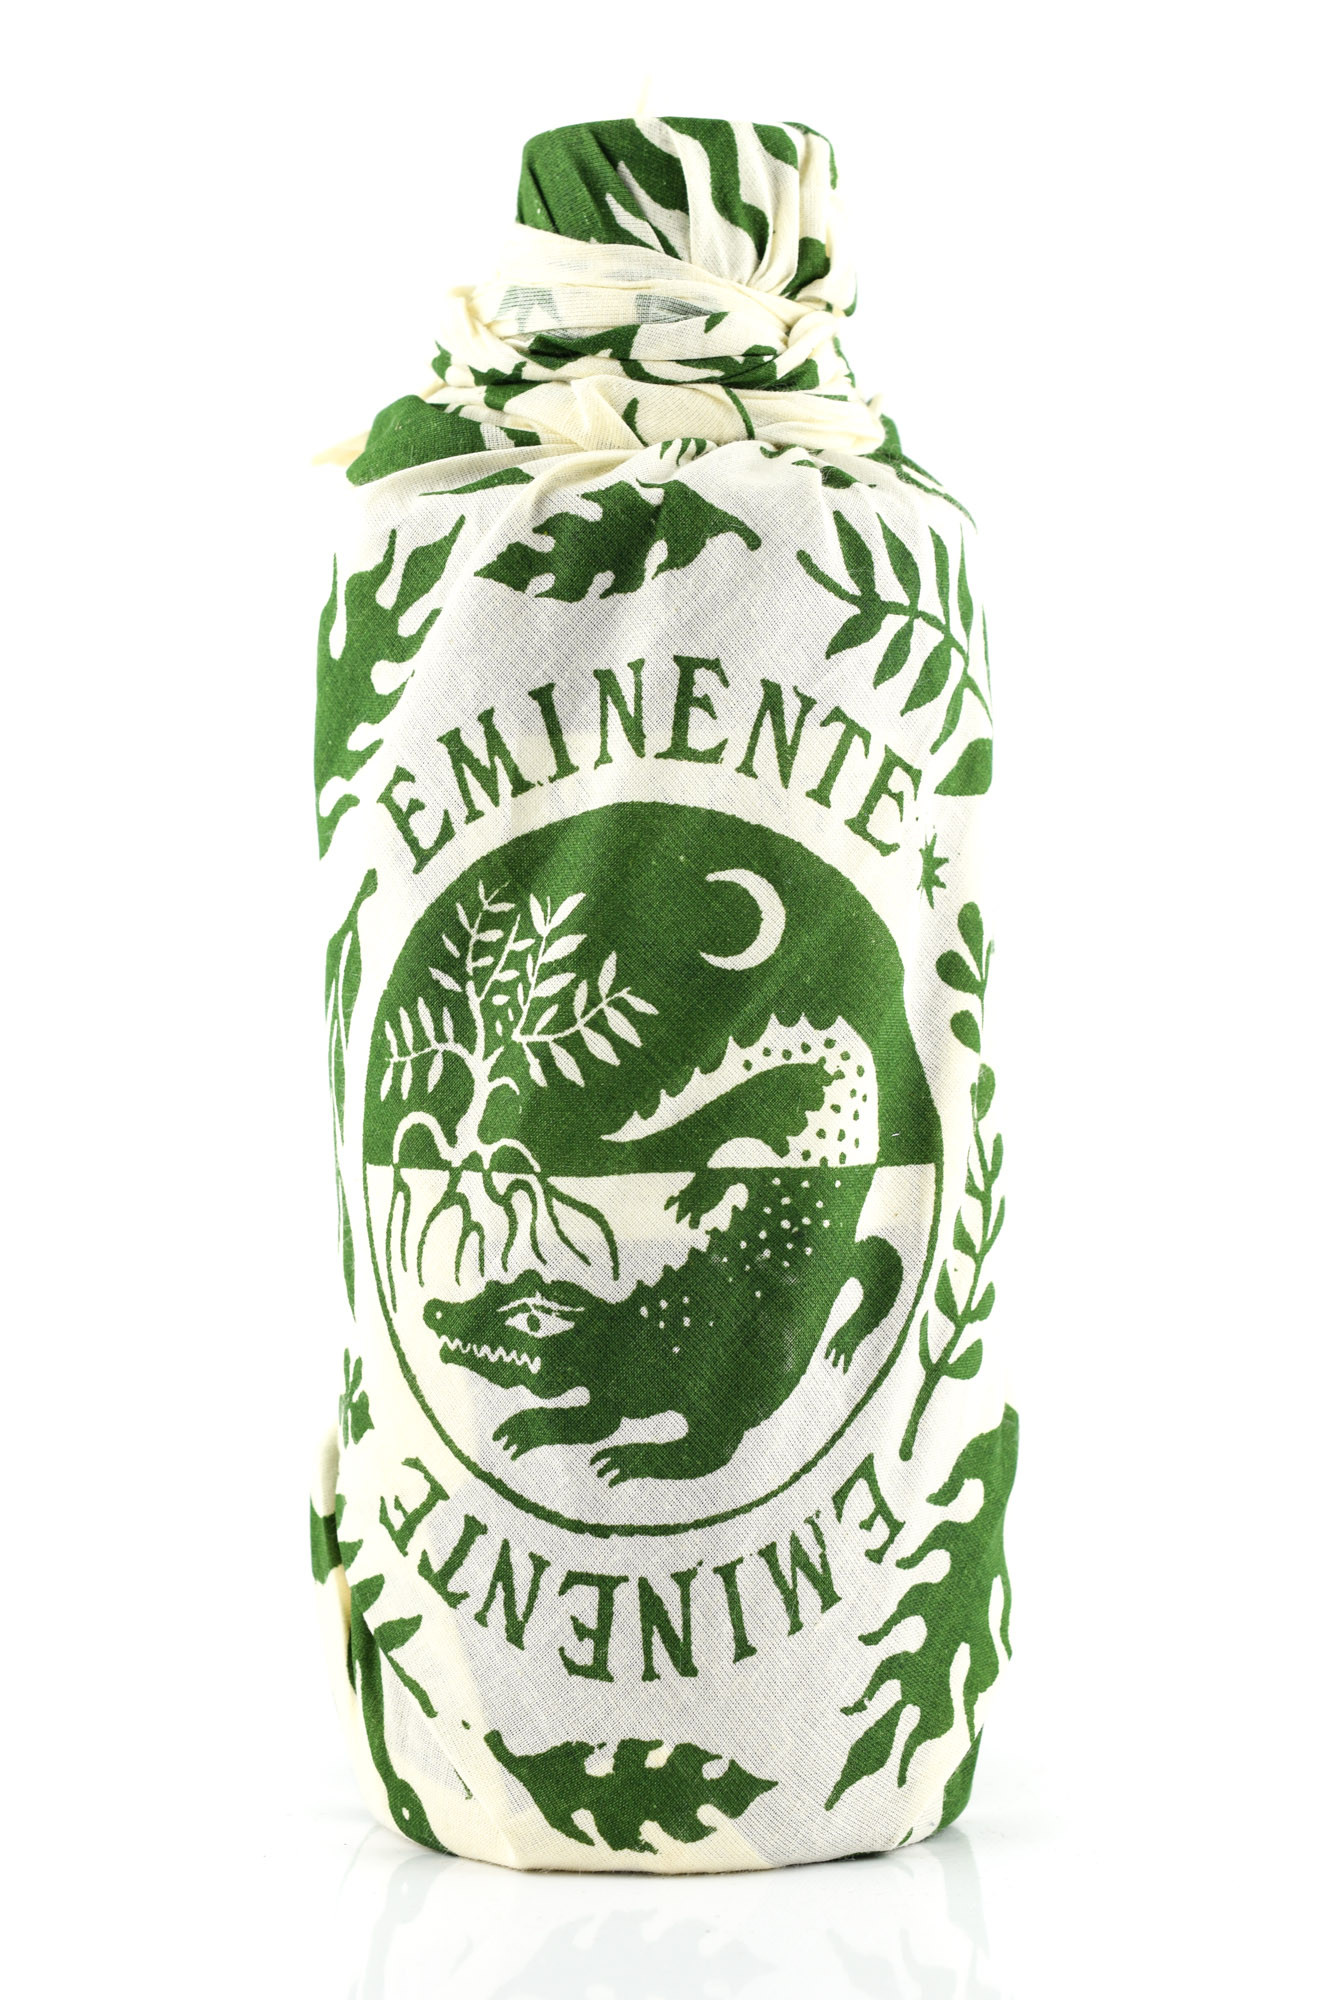 LVMH expands Wines & Spirits portfolio with Eminente, a new